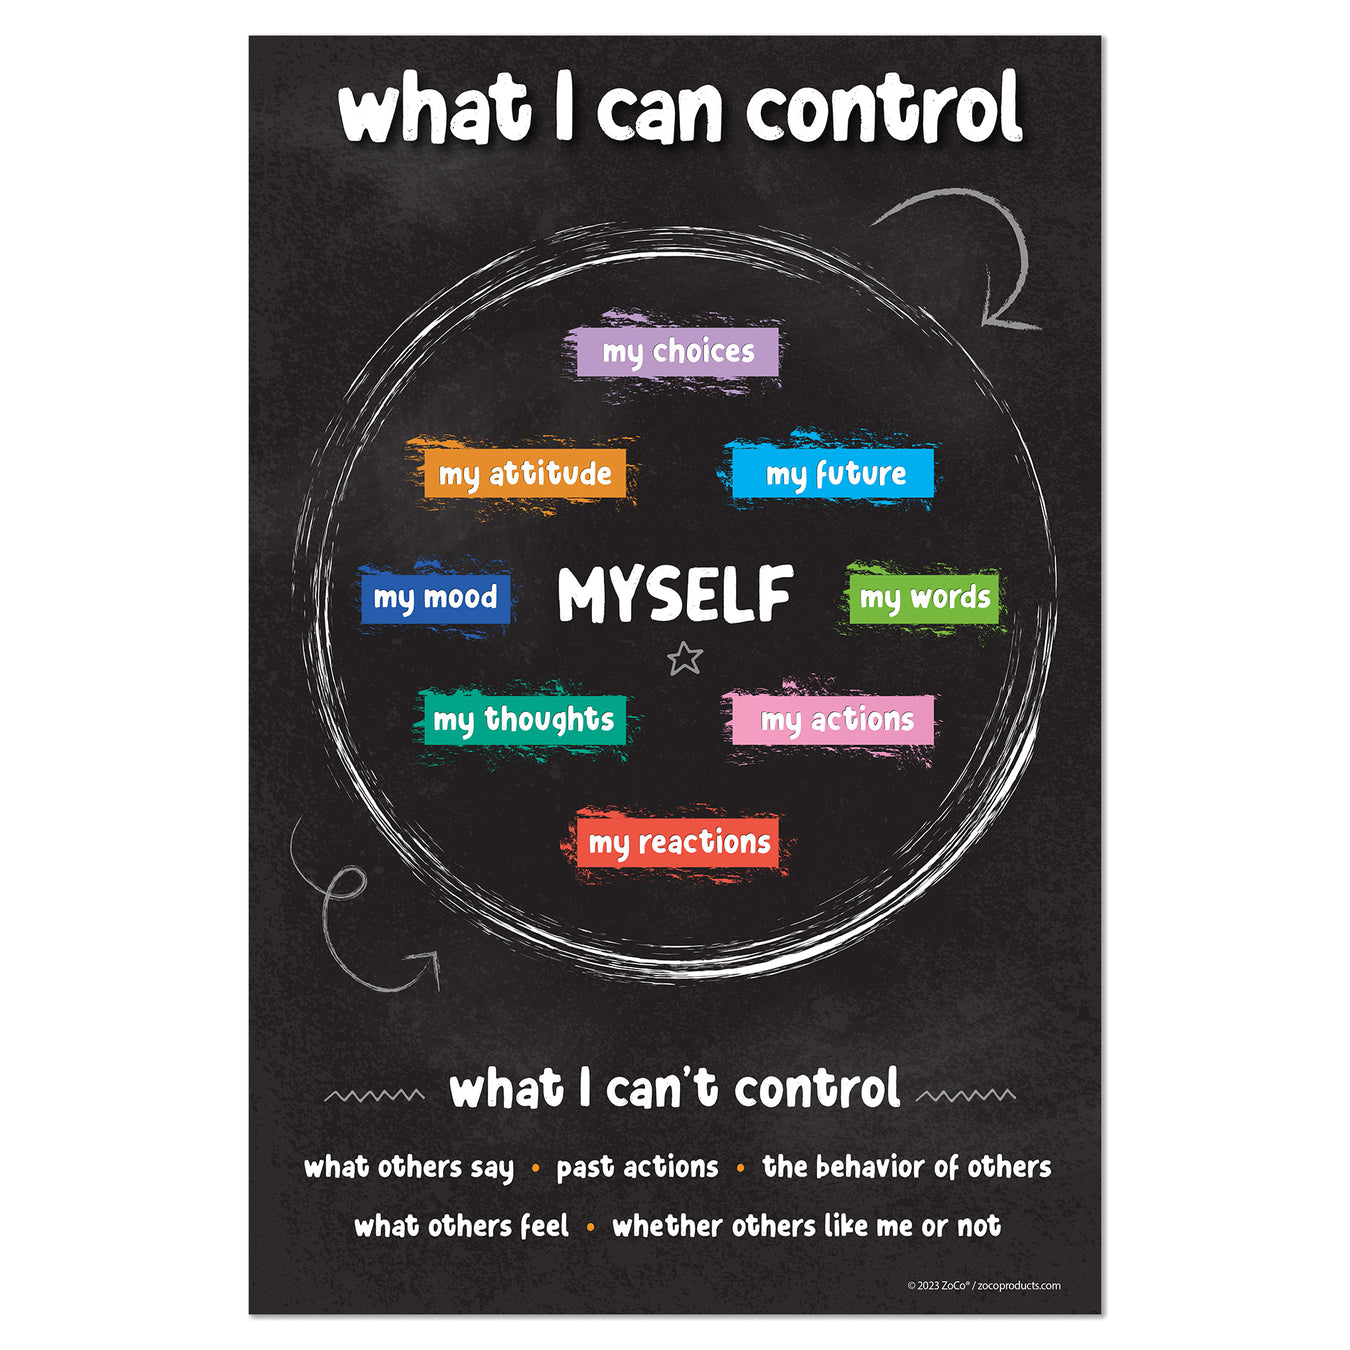 What I Can Control, What I Can't Control - Growth Mindset Poster - 12"x18" - Laminated